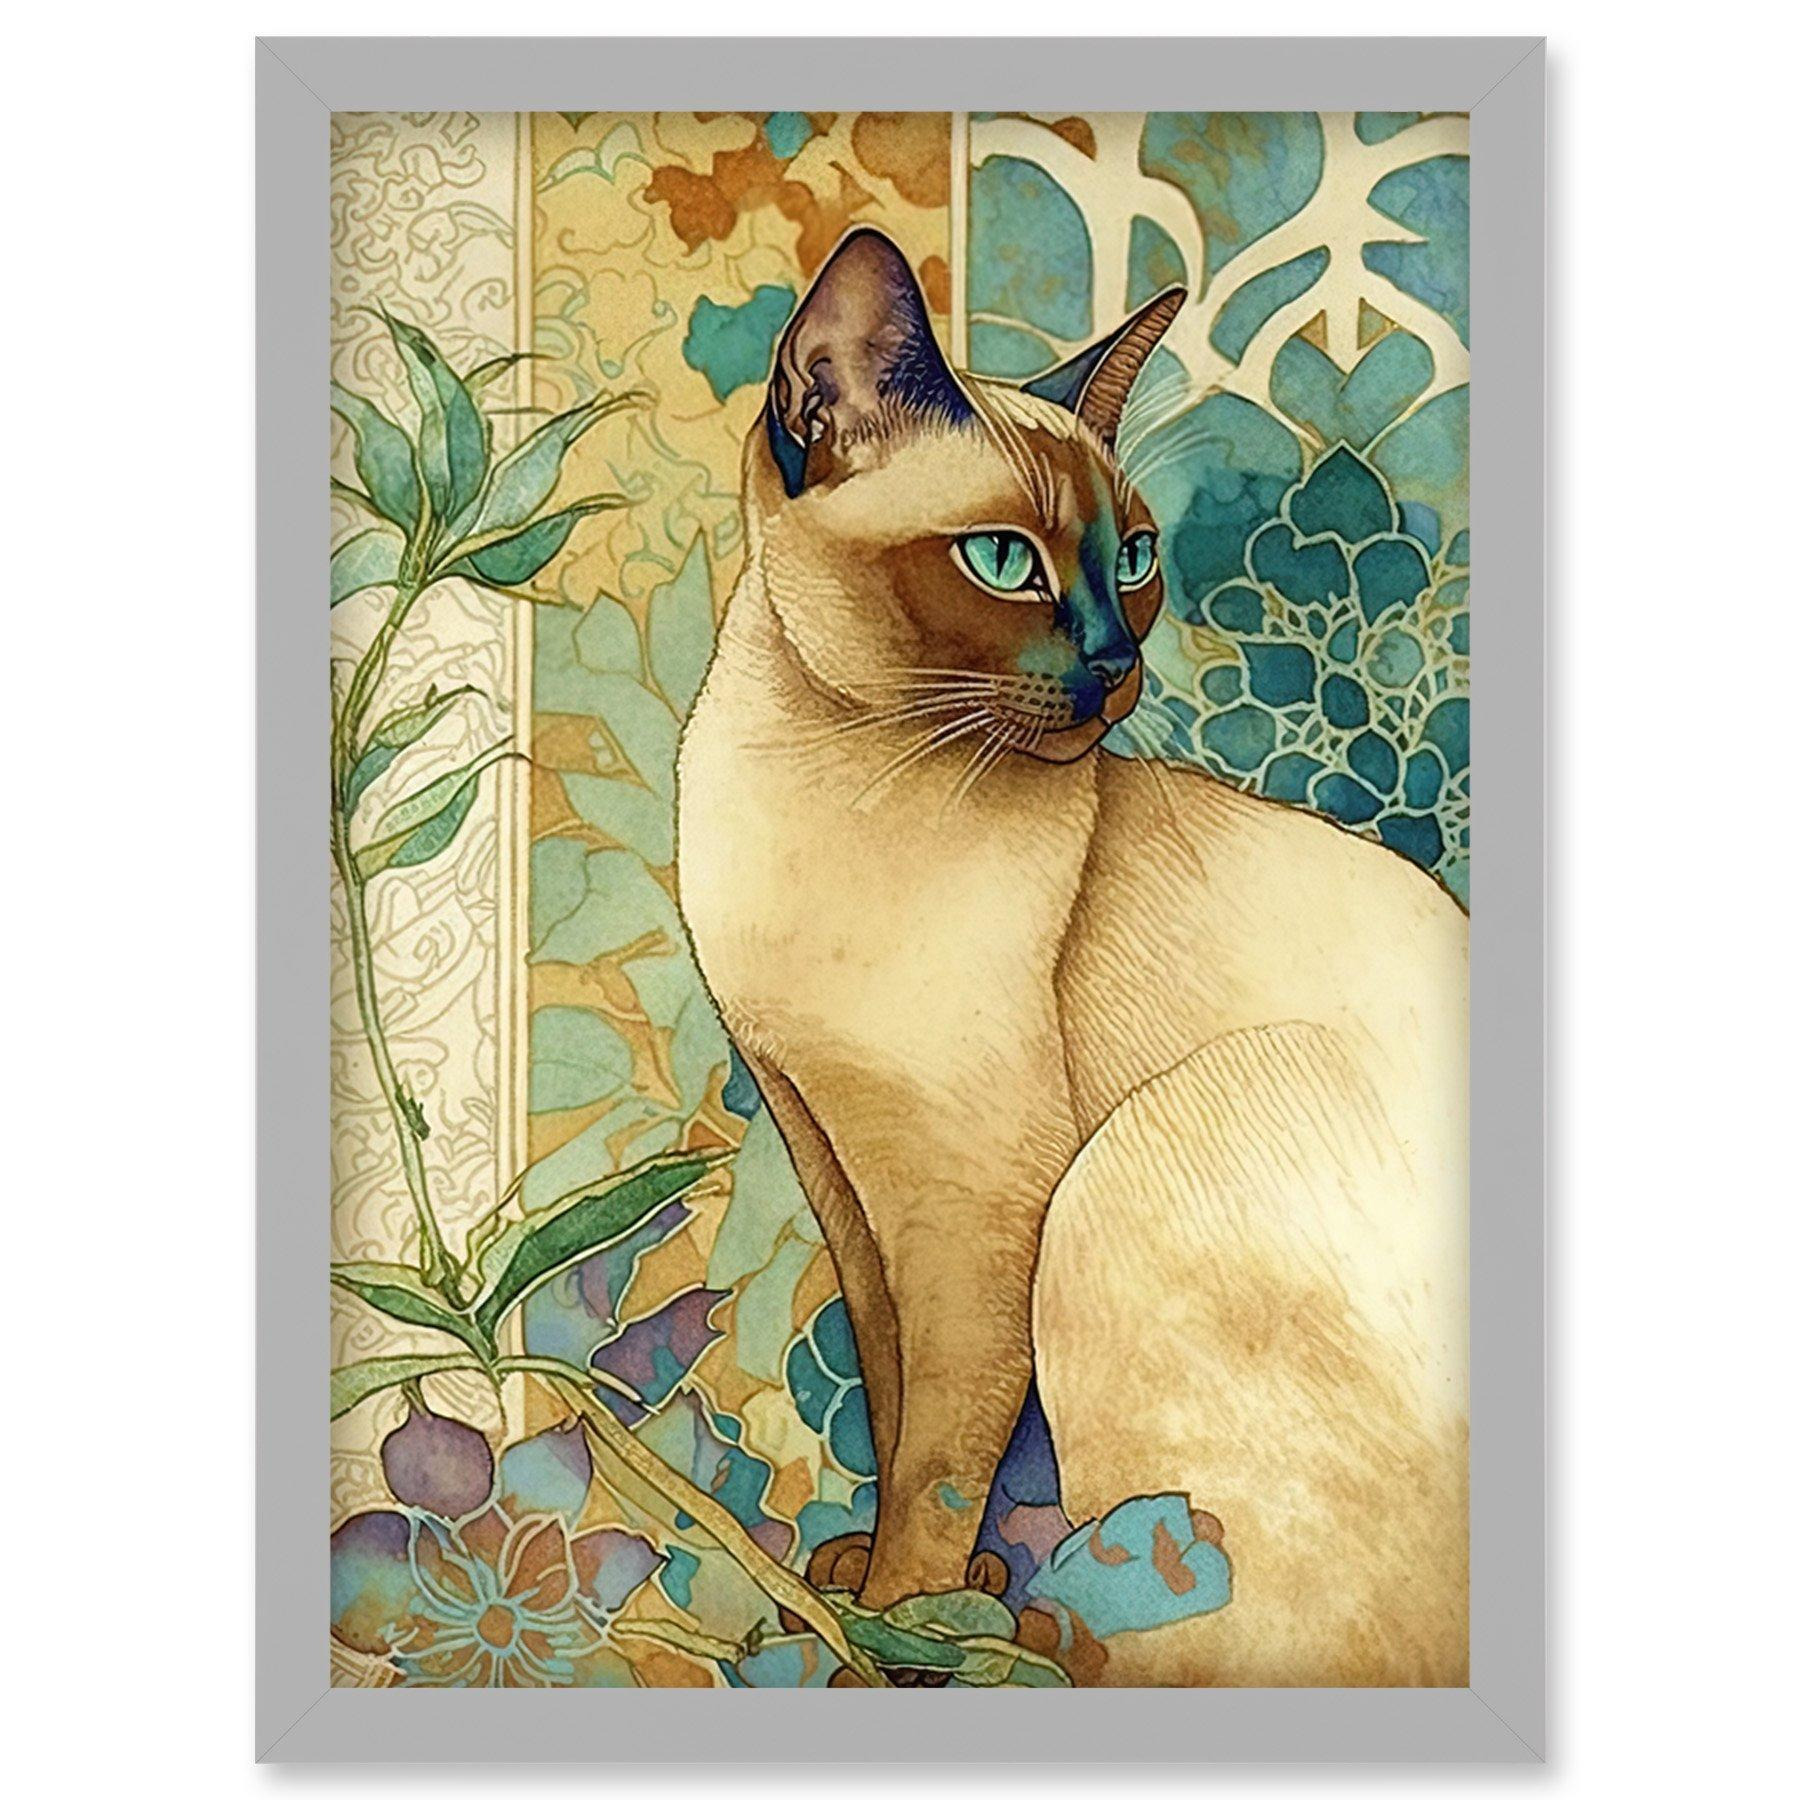 Tonkinese Cat with Art Nouveau Botanical Patterns Colourful Watercolour Illustration Artwork Framed Wall Art Print A4 - image 1